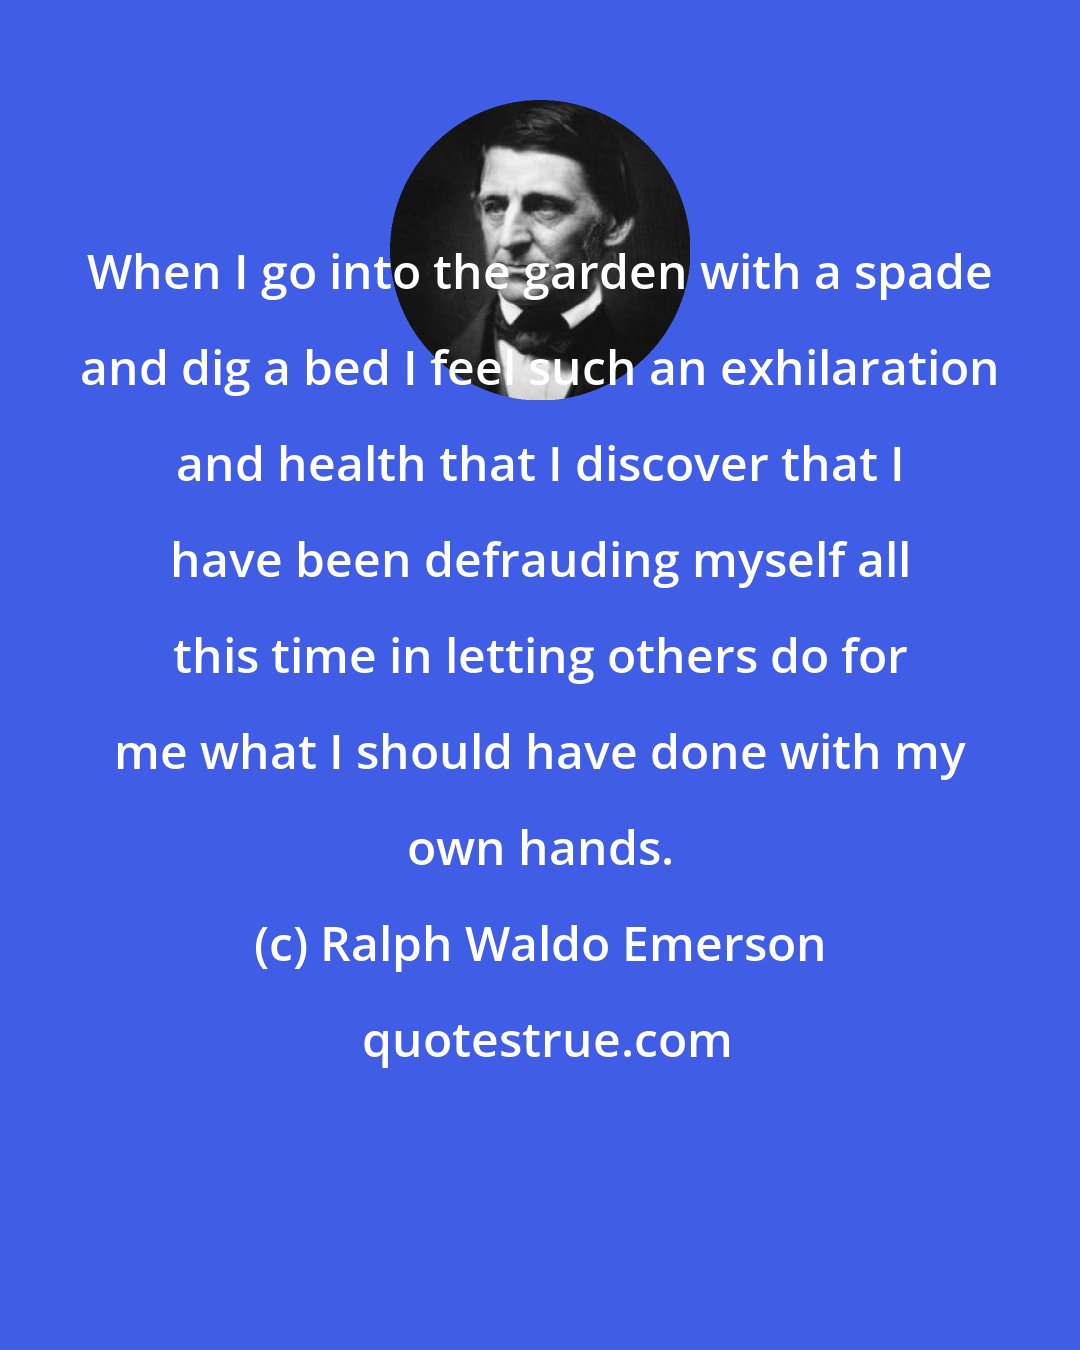 Ralph Waldo Emerson: When I go into the garden with a spade and dig a bed I feel such an exhilaration and health that I discover that I have been defrauding myself all this time in letting others do for me what I should have done with my own hands.